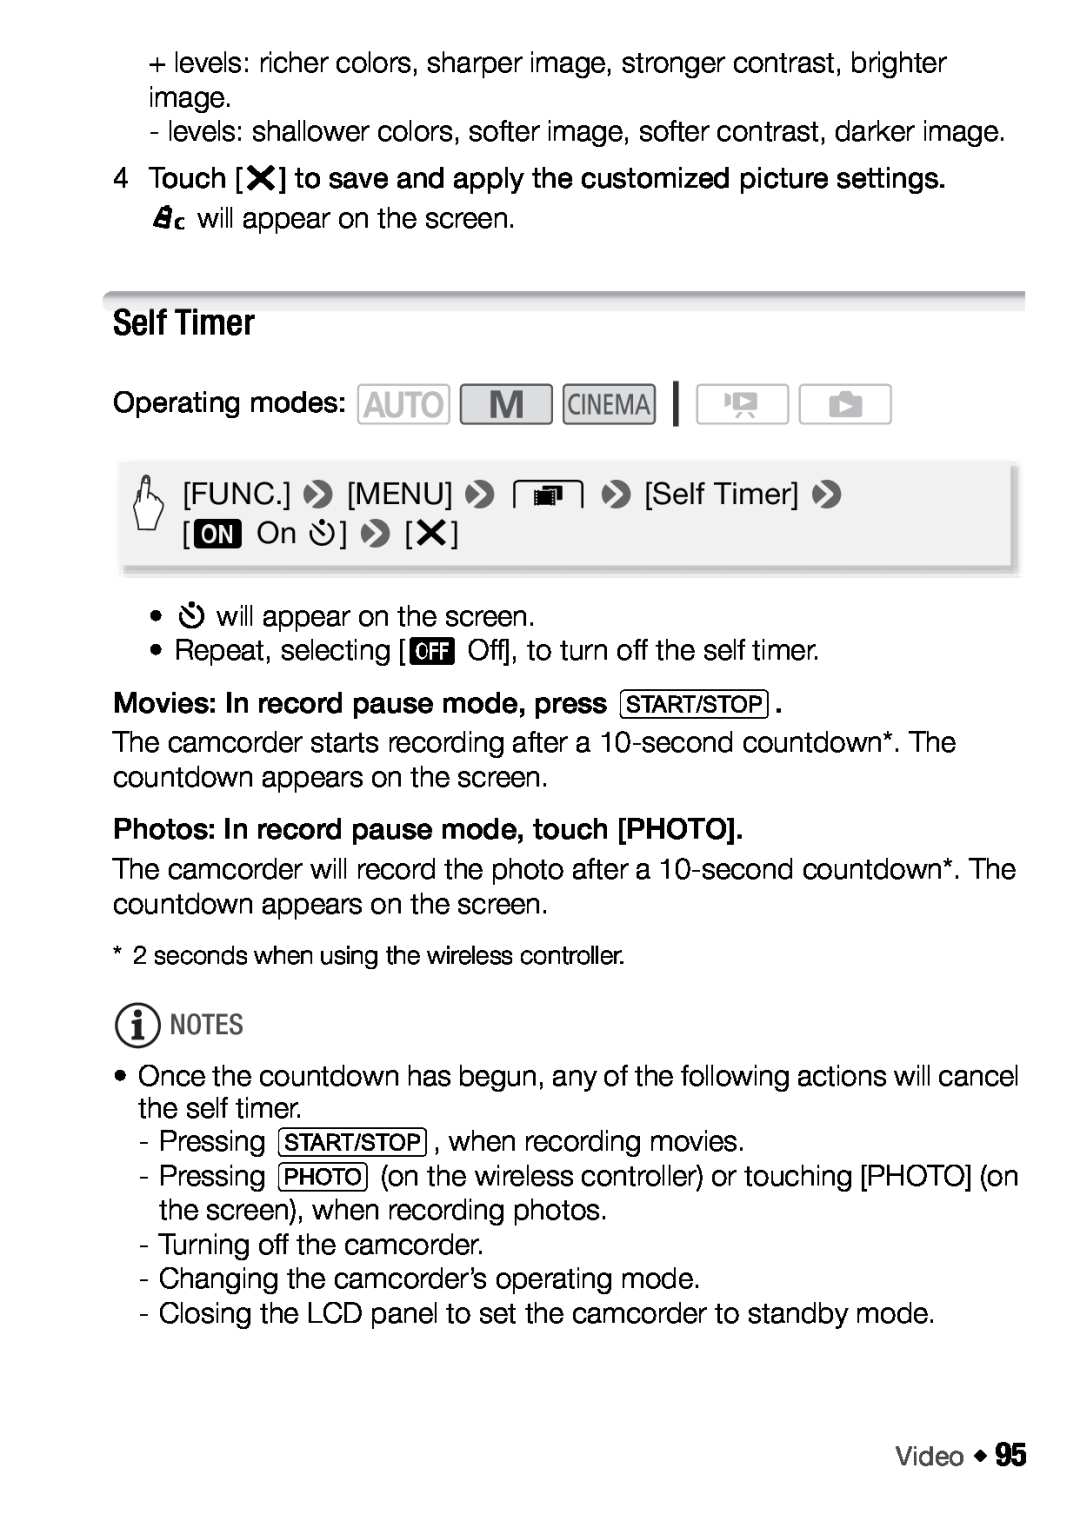 Canon HFM46, HFM406 instruction manual Self Timer, seconds when using the wireless controller 